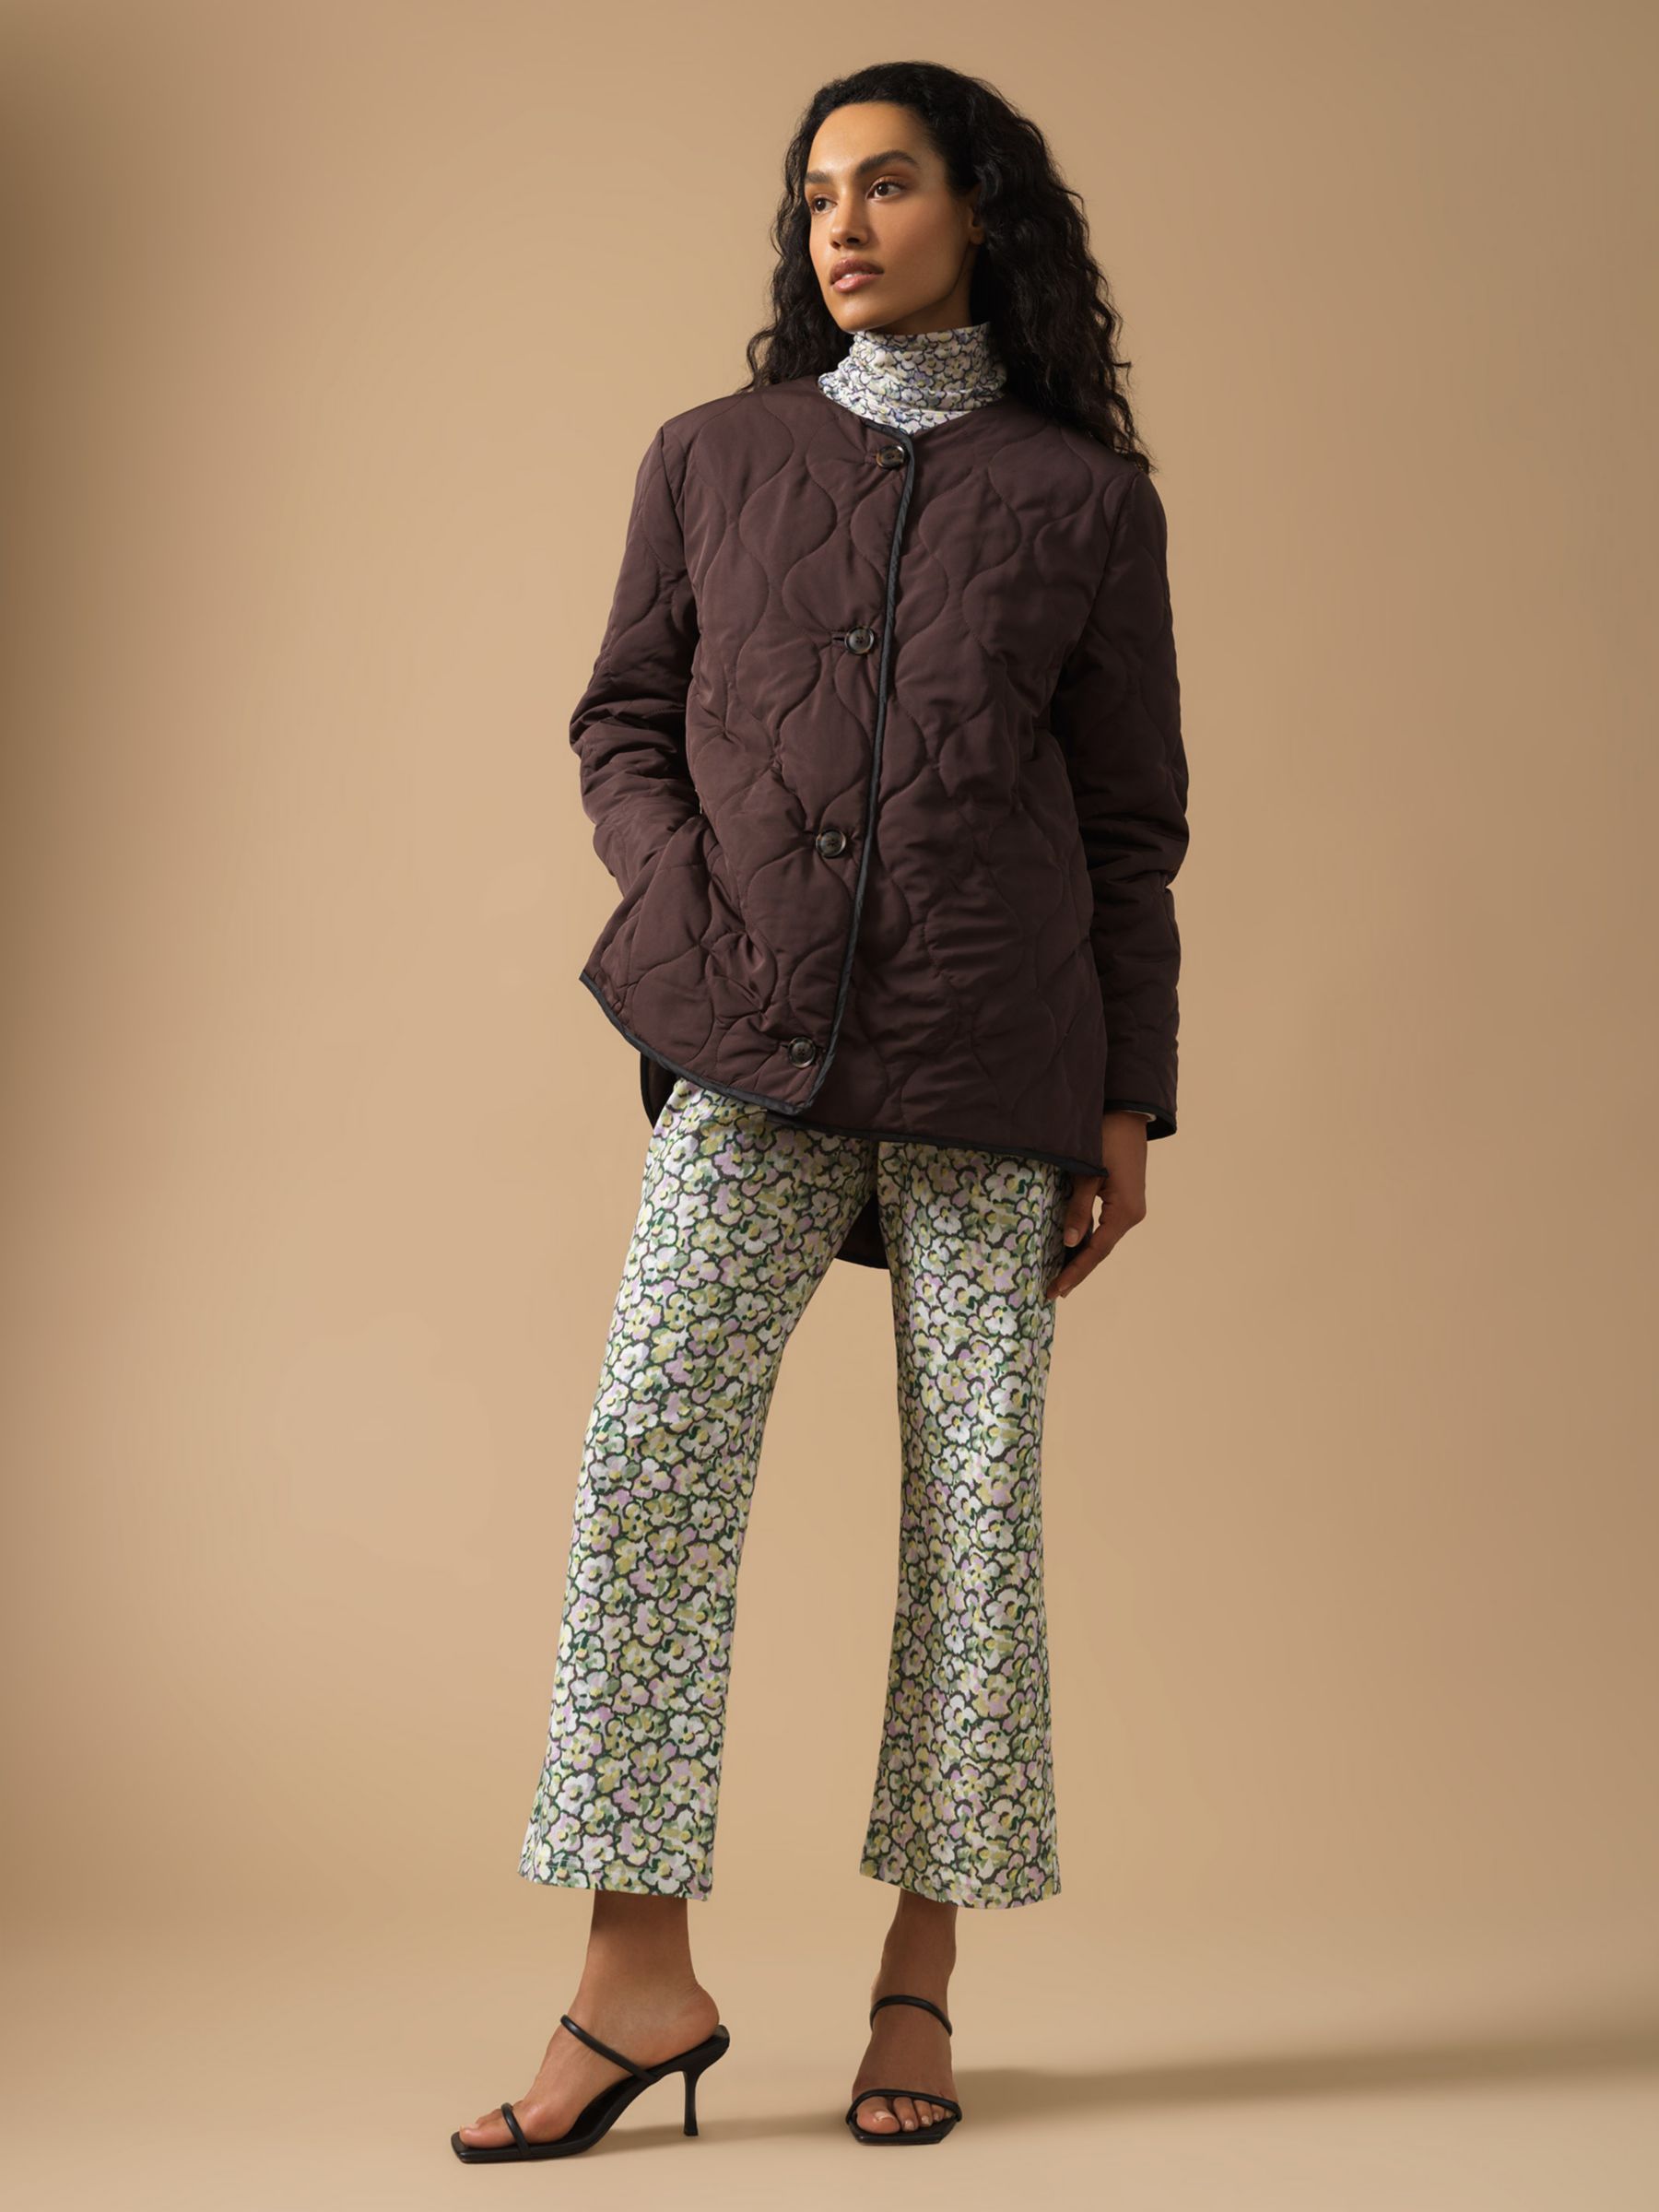 Great Plains Utility Diamond Quilted Parka Coat, Cocoa